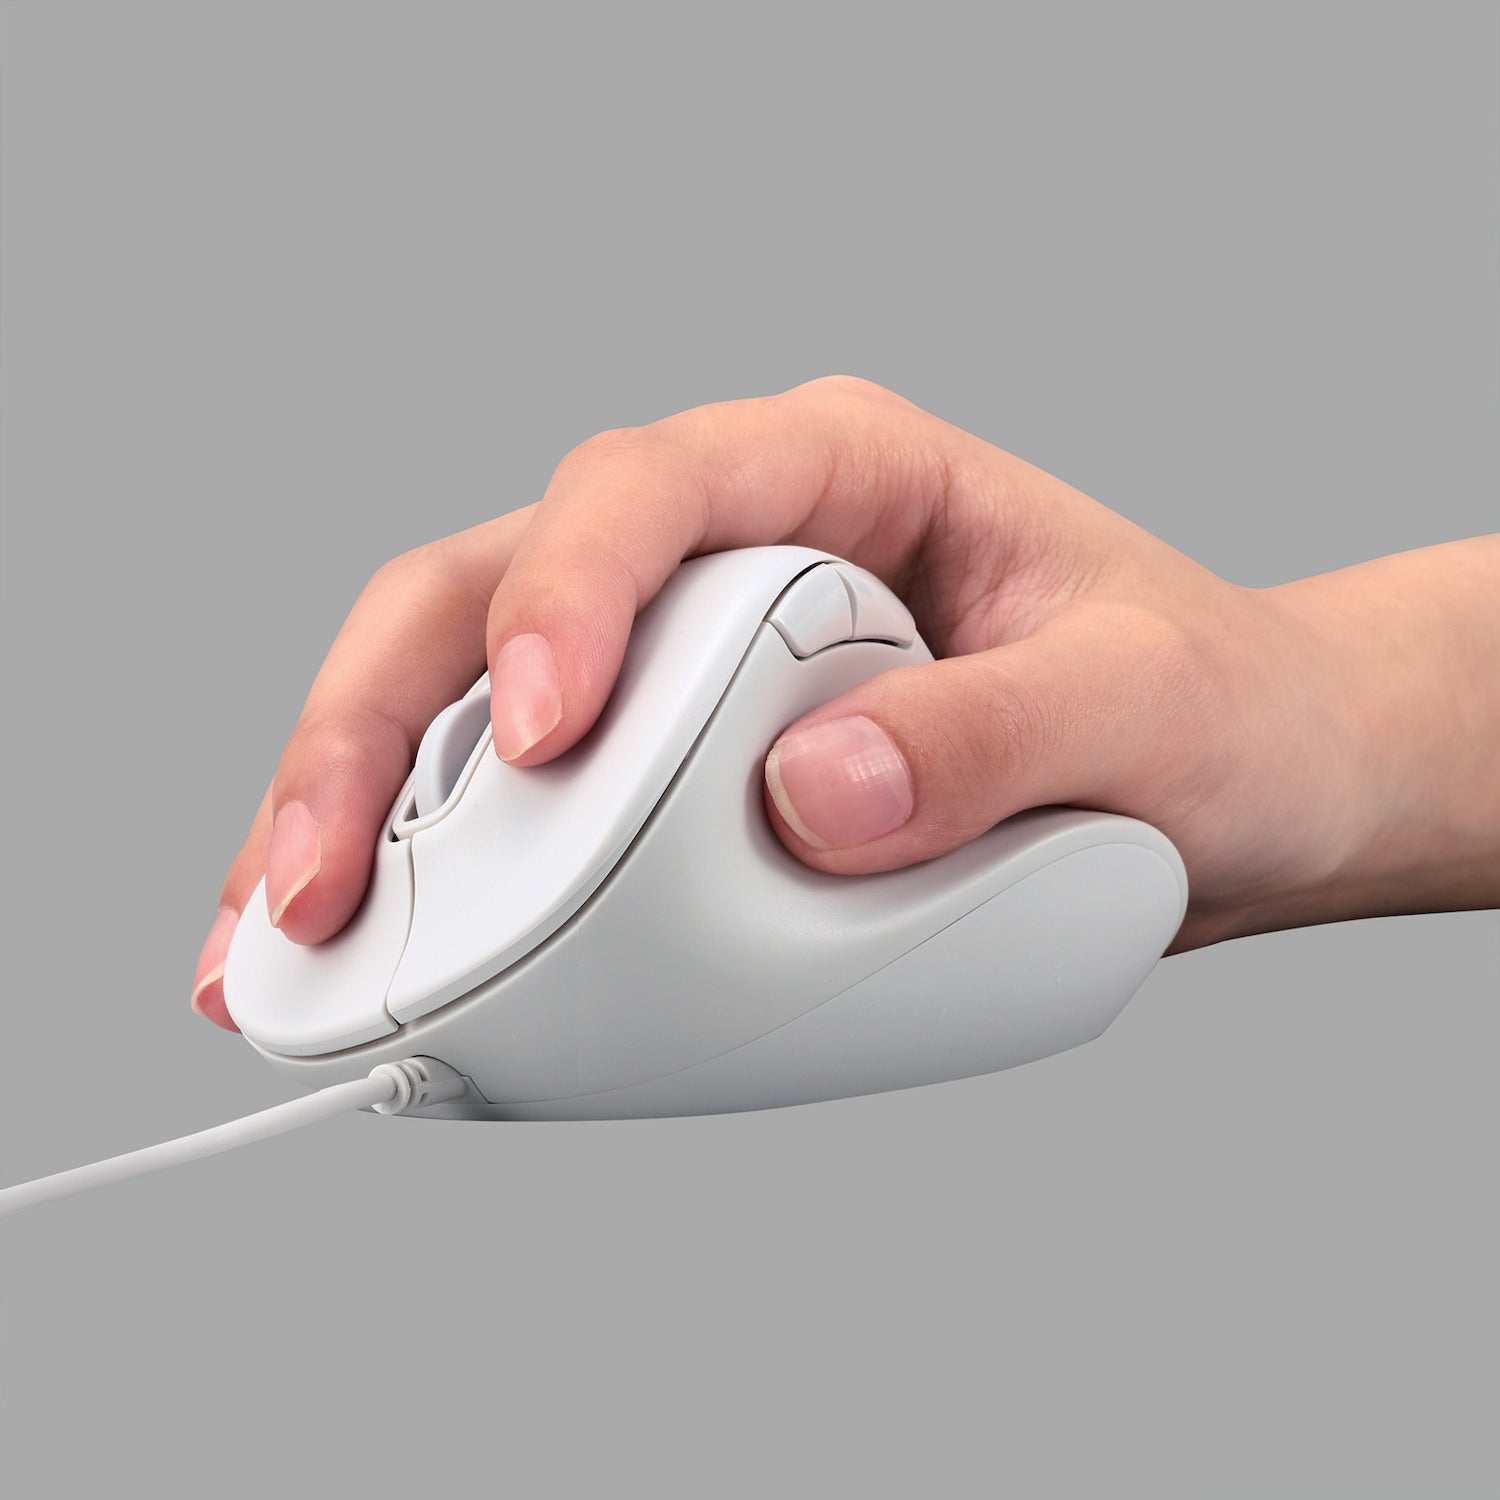 EX-G Wired Ergonomic Mouse